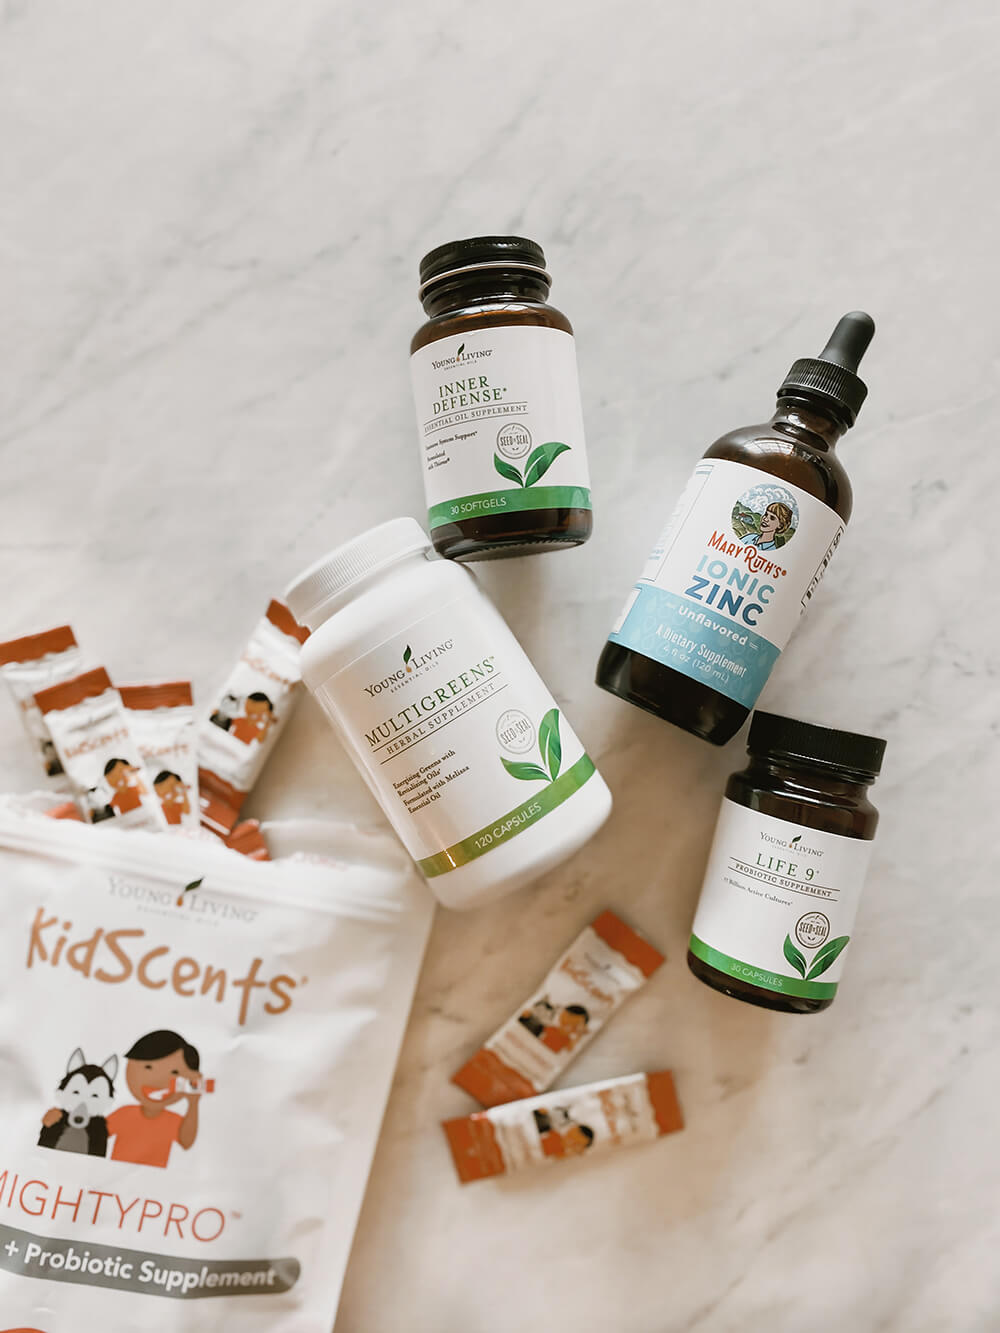 It's that time of year and keeping my family feeling good and well is top of mind. I am sharing my winter wellness favorites and must-haves over on the blog!